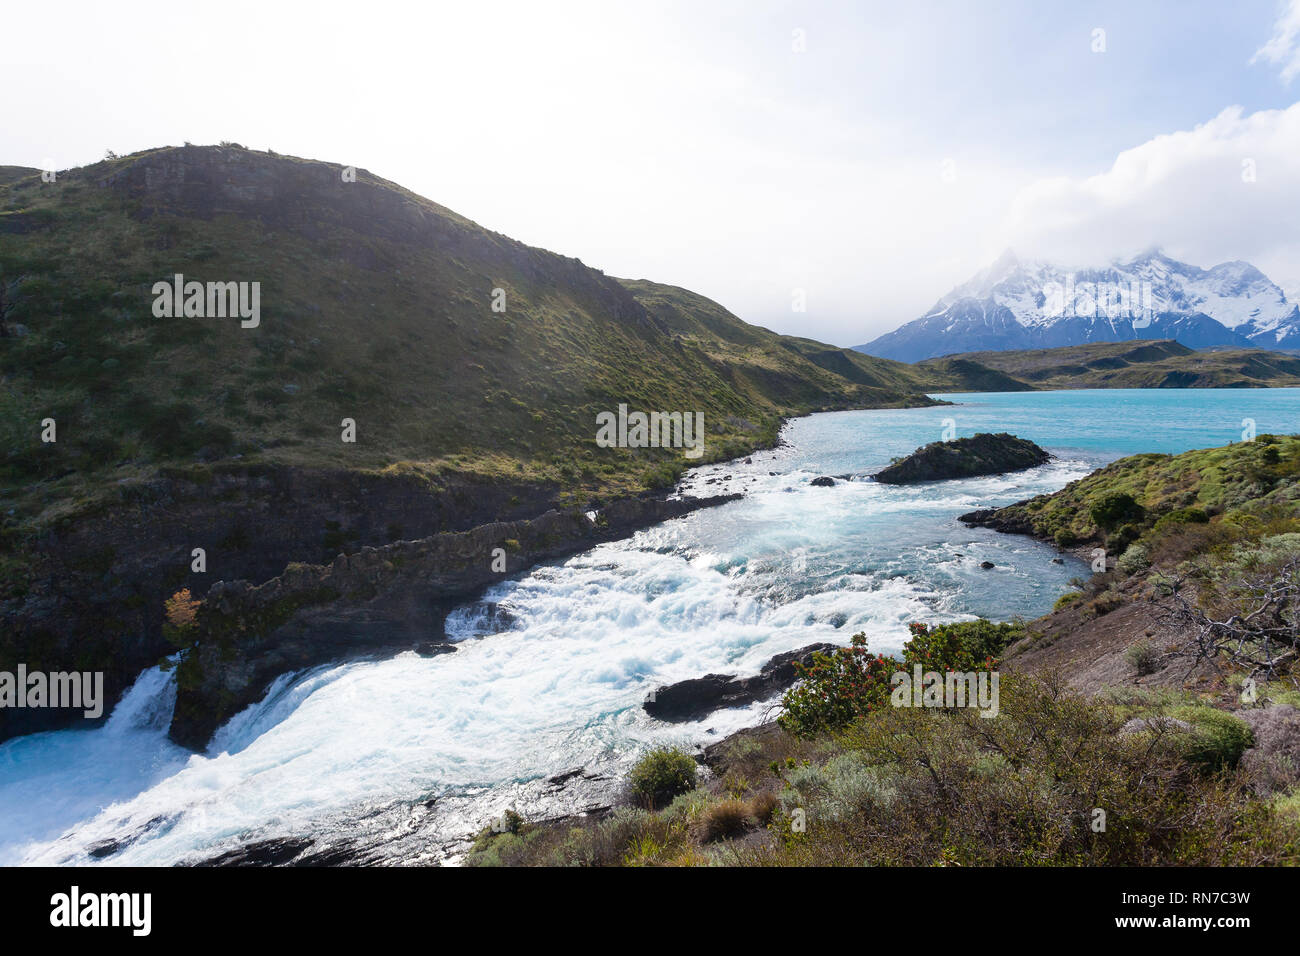 Salto Chico waterfall view, Torres del Paine National Park, Chile. Chilean Patagonia landscape Stock Photo